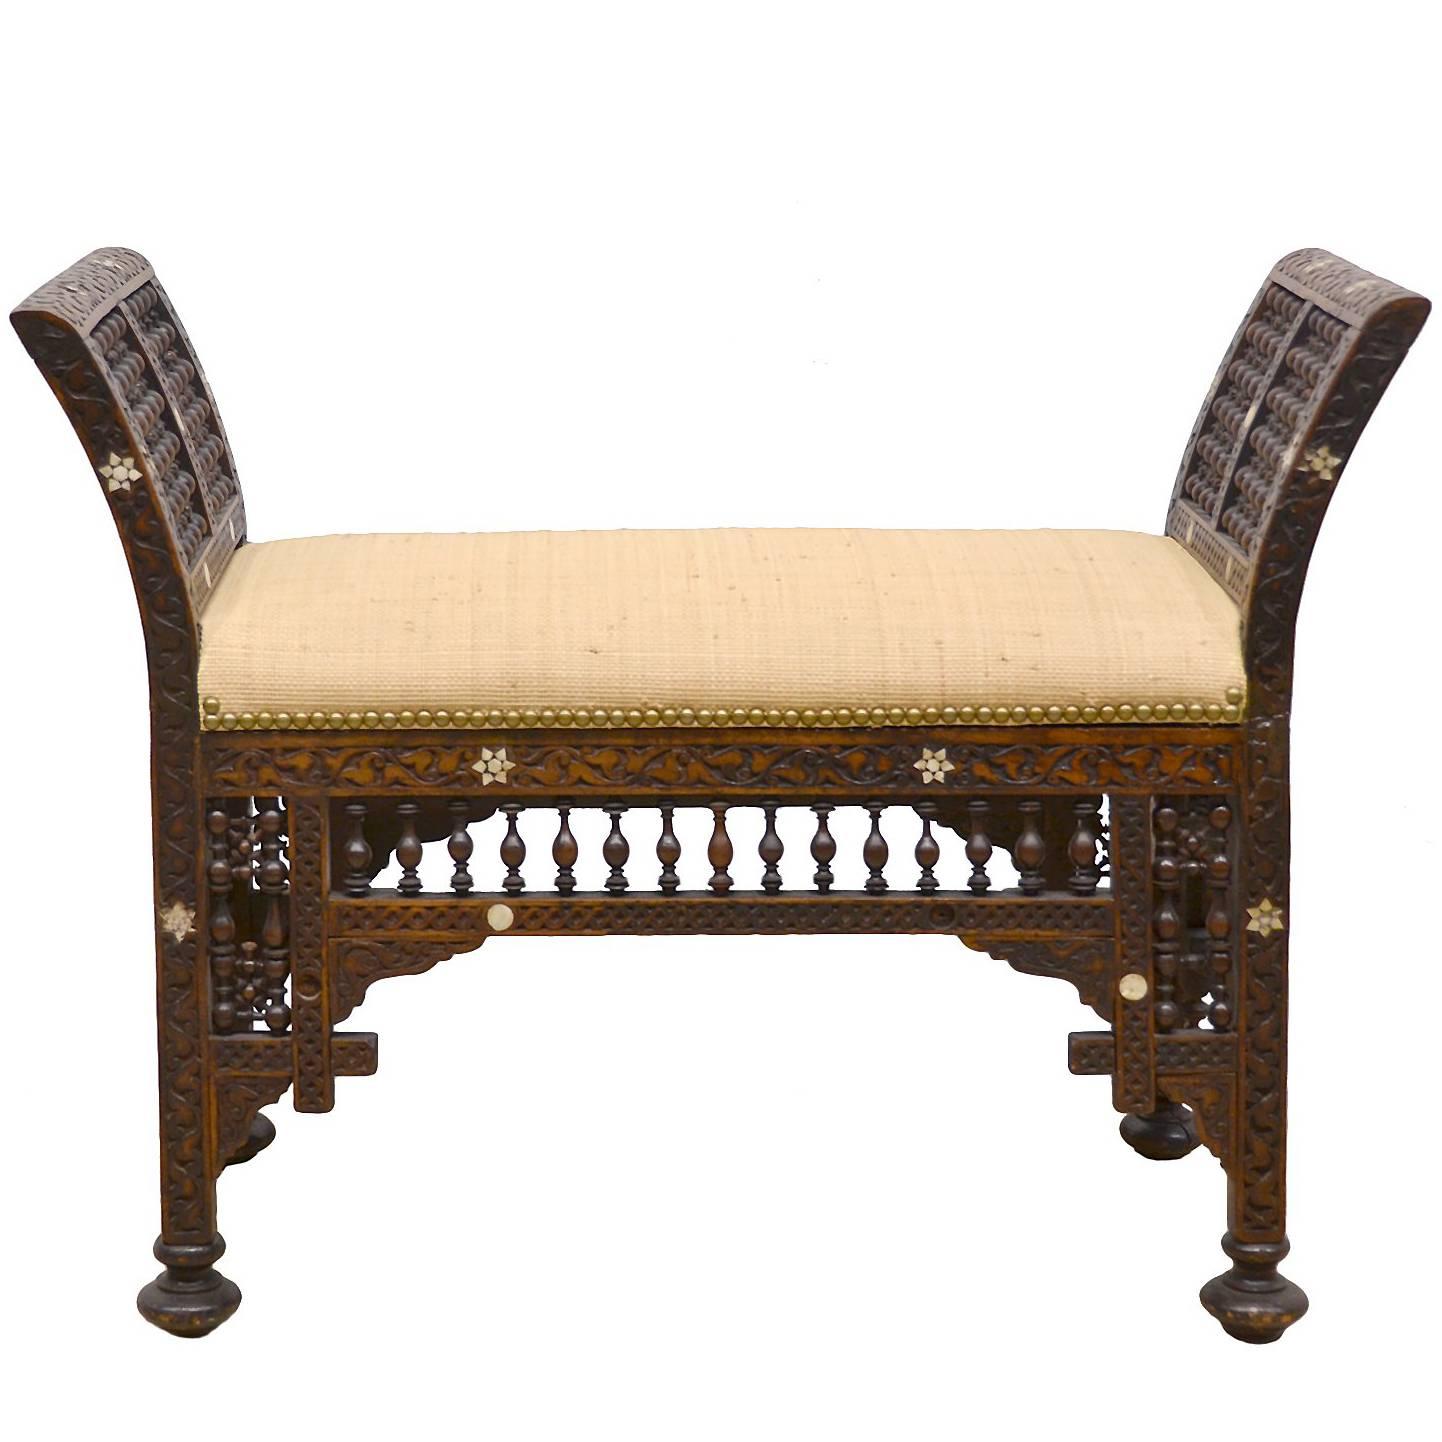 19th Century Moroccan Bench with Mother of Pearl and Bone Inlay